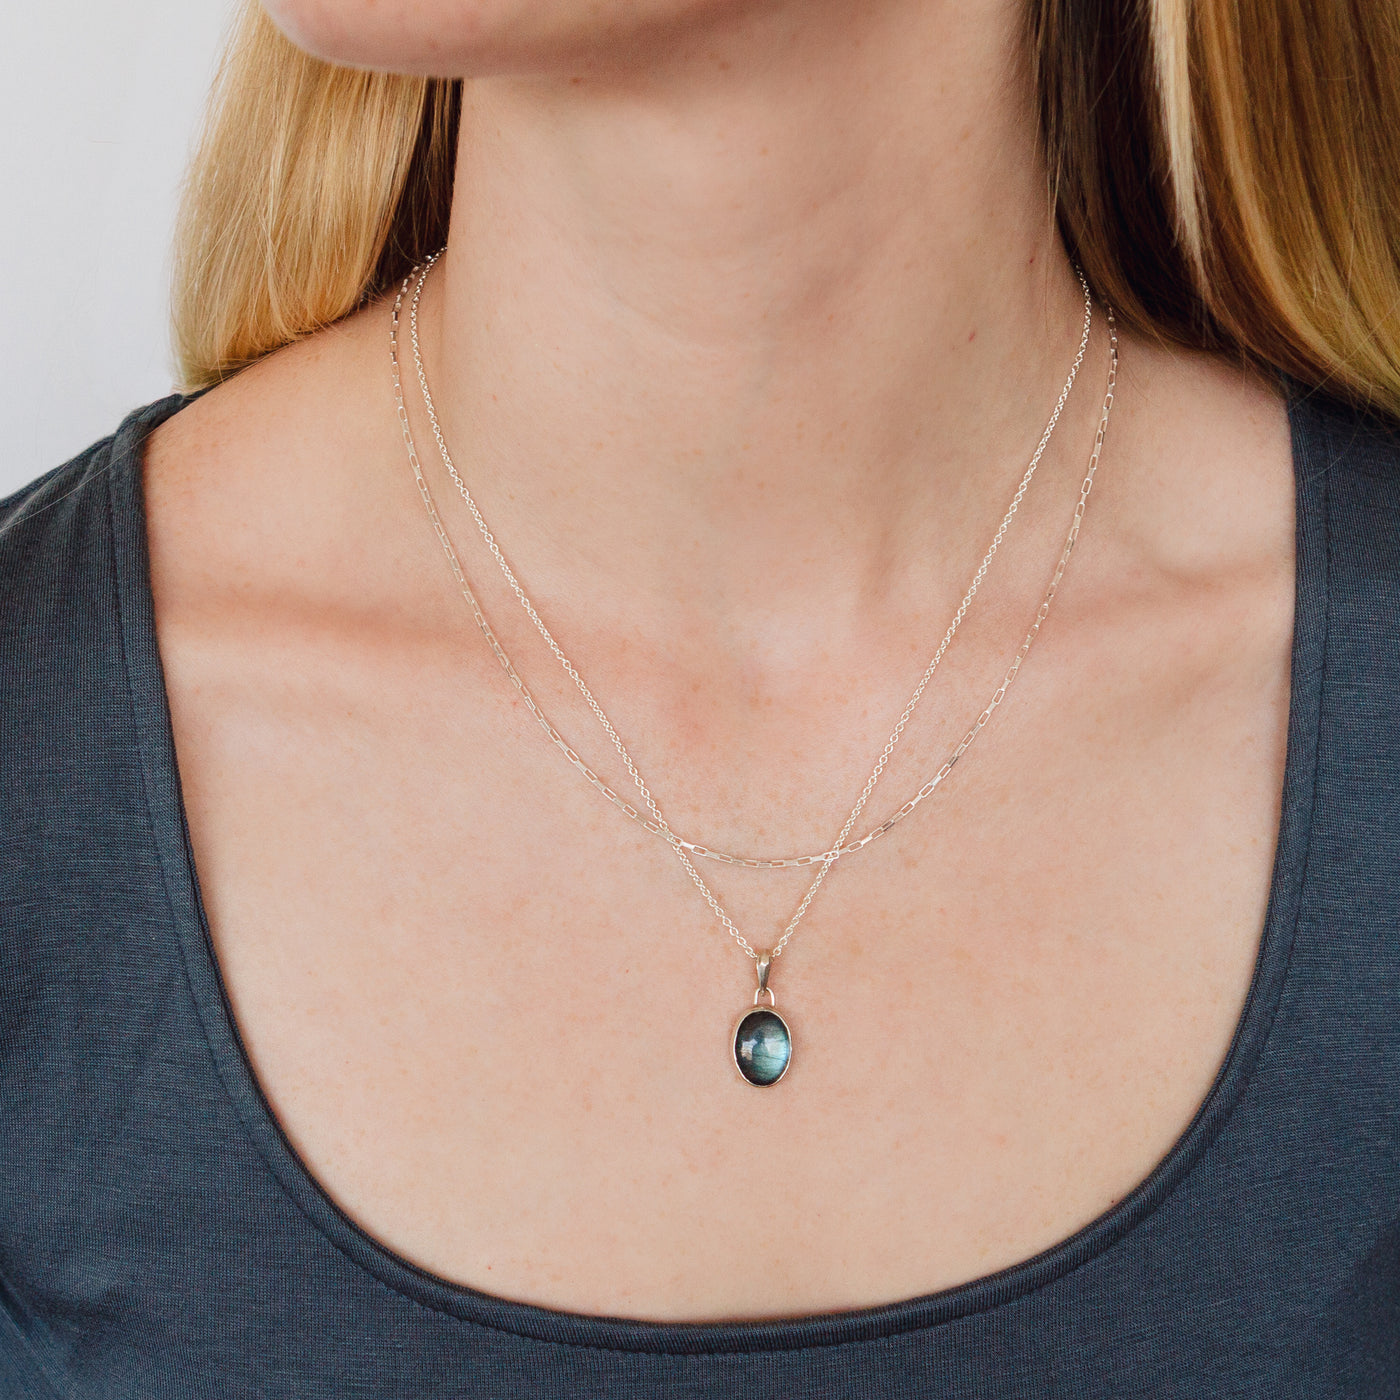 Smooth Oval Labradorite cabochon in a sterling silver bezel with a faceted bail around a neck layered with a link chain